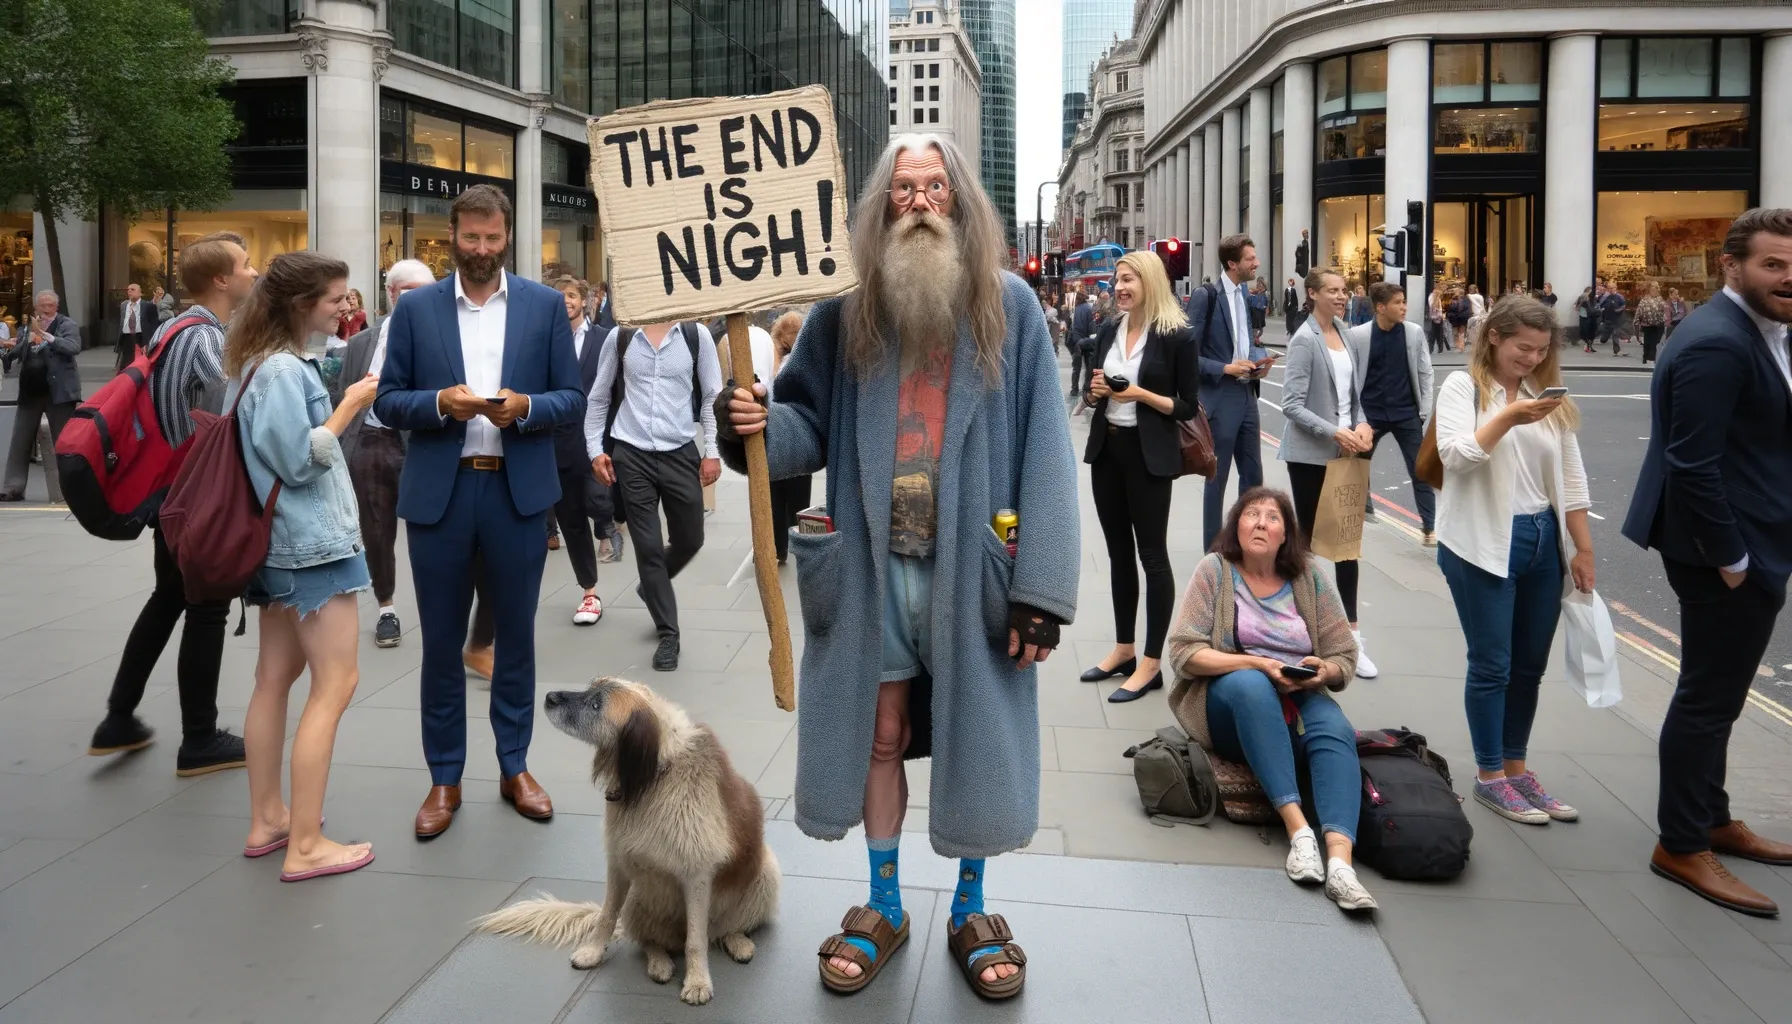 Old, long-haired dude, wearing sandals and a dirty robe, holding "The END is NIGH!" sign.